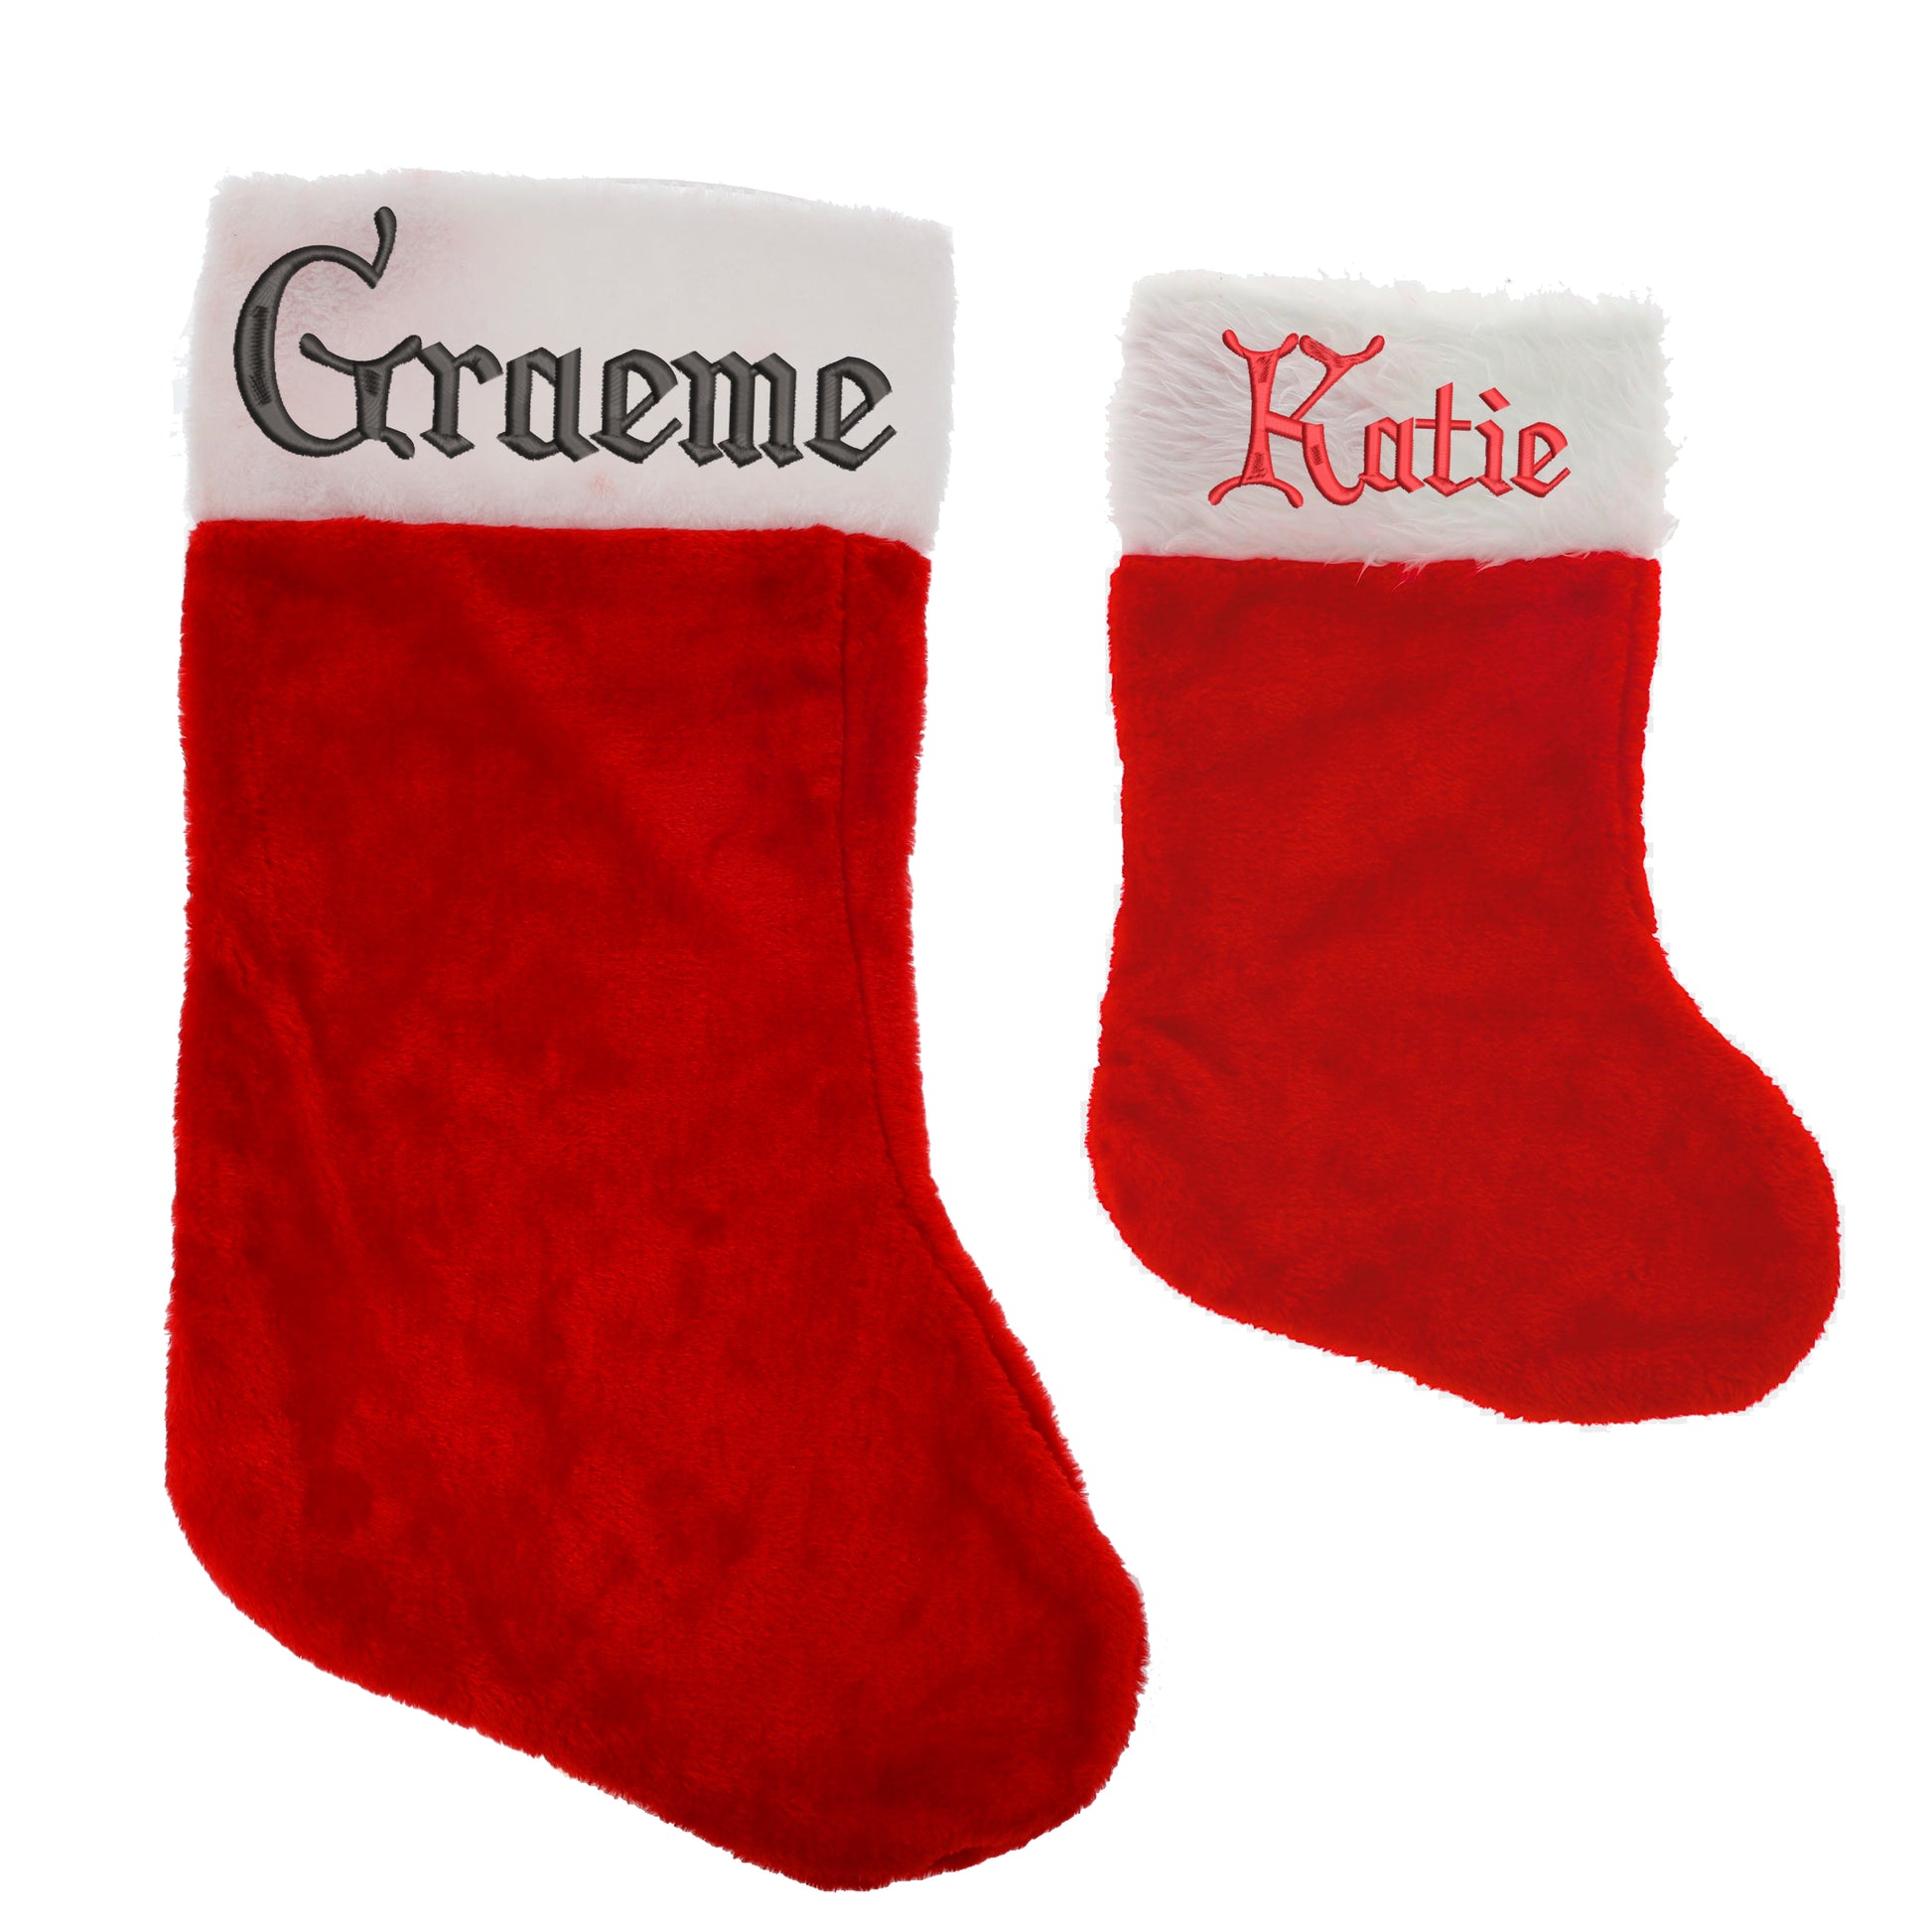 Embroidered Luxury Plush Red Christmas Stocking Jumbo or Standard Size Personalised With Any Name  - Always Looking Good -   